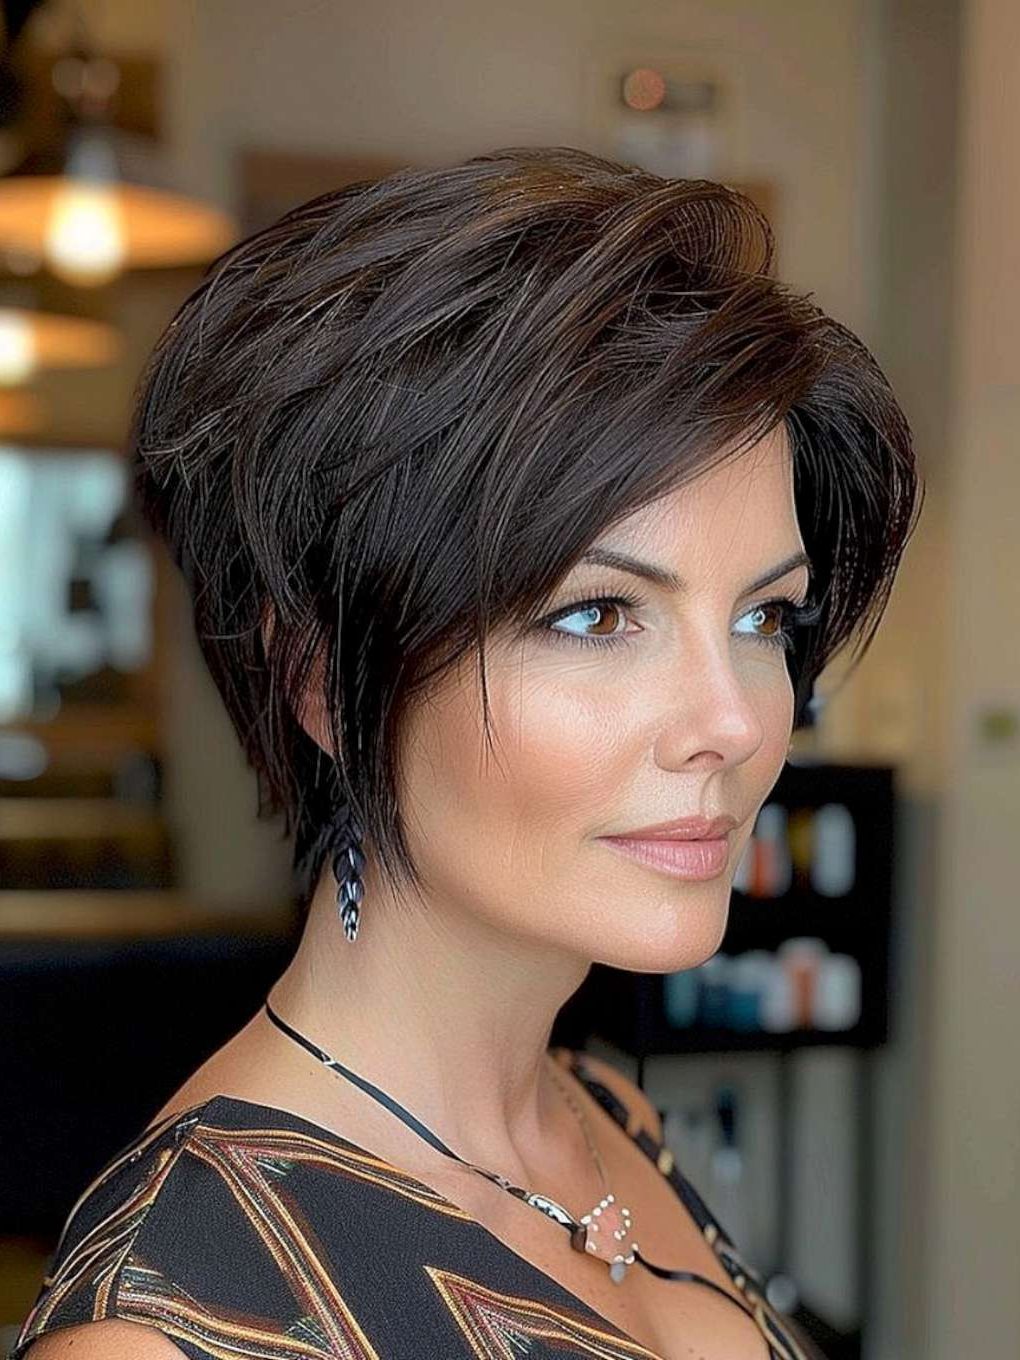 The Latest Trends in Short Hairstyles for Women - 6